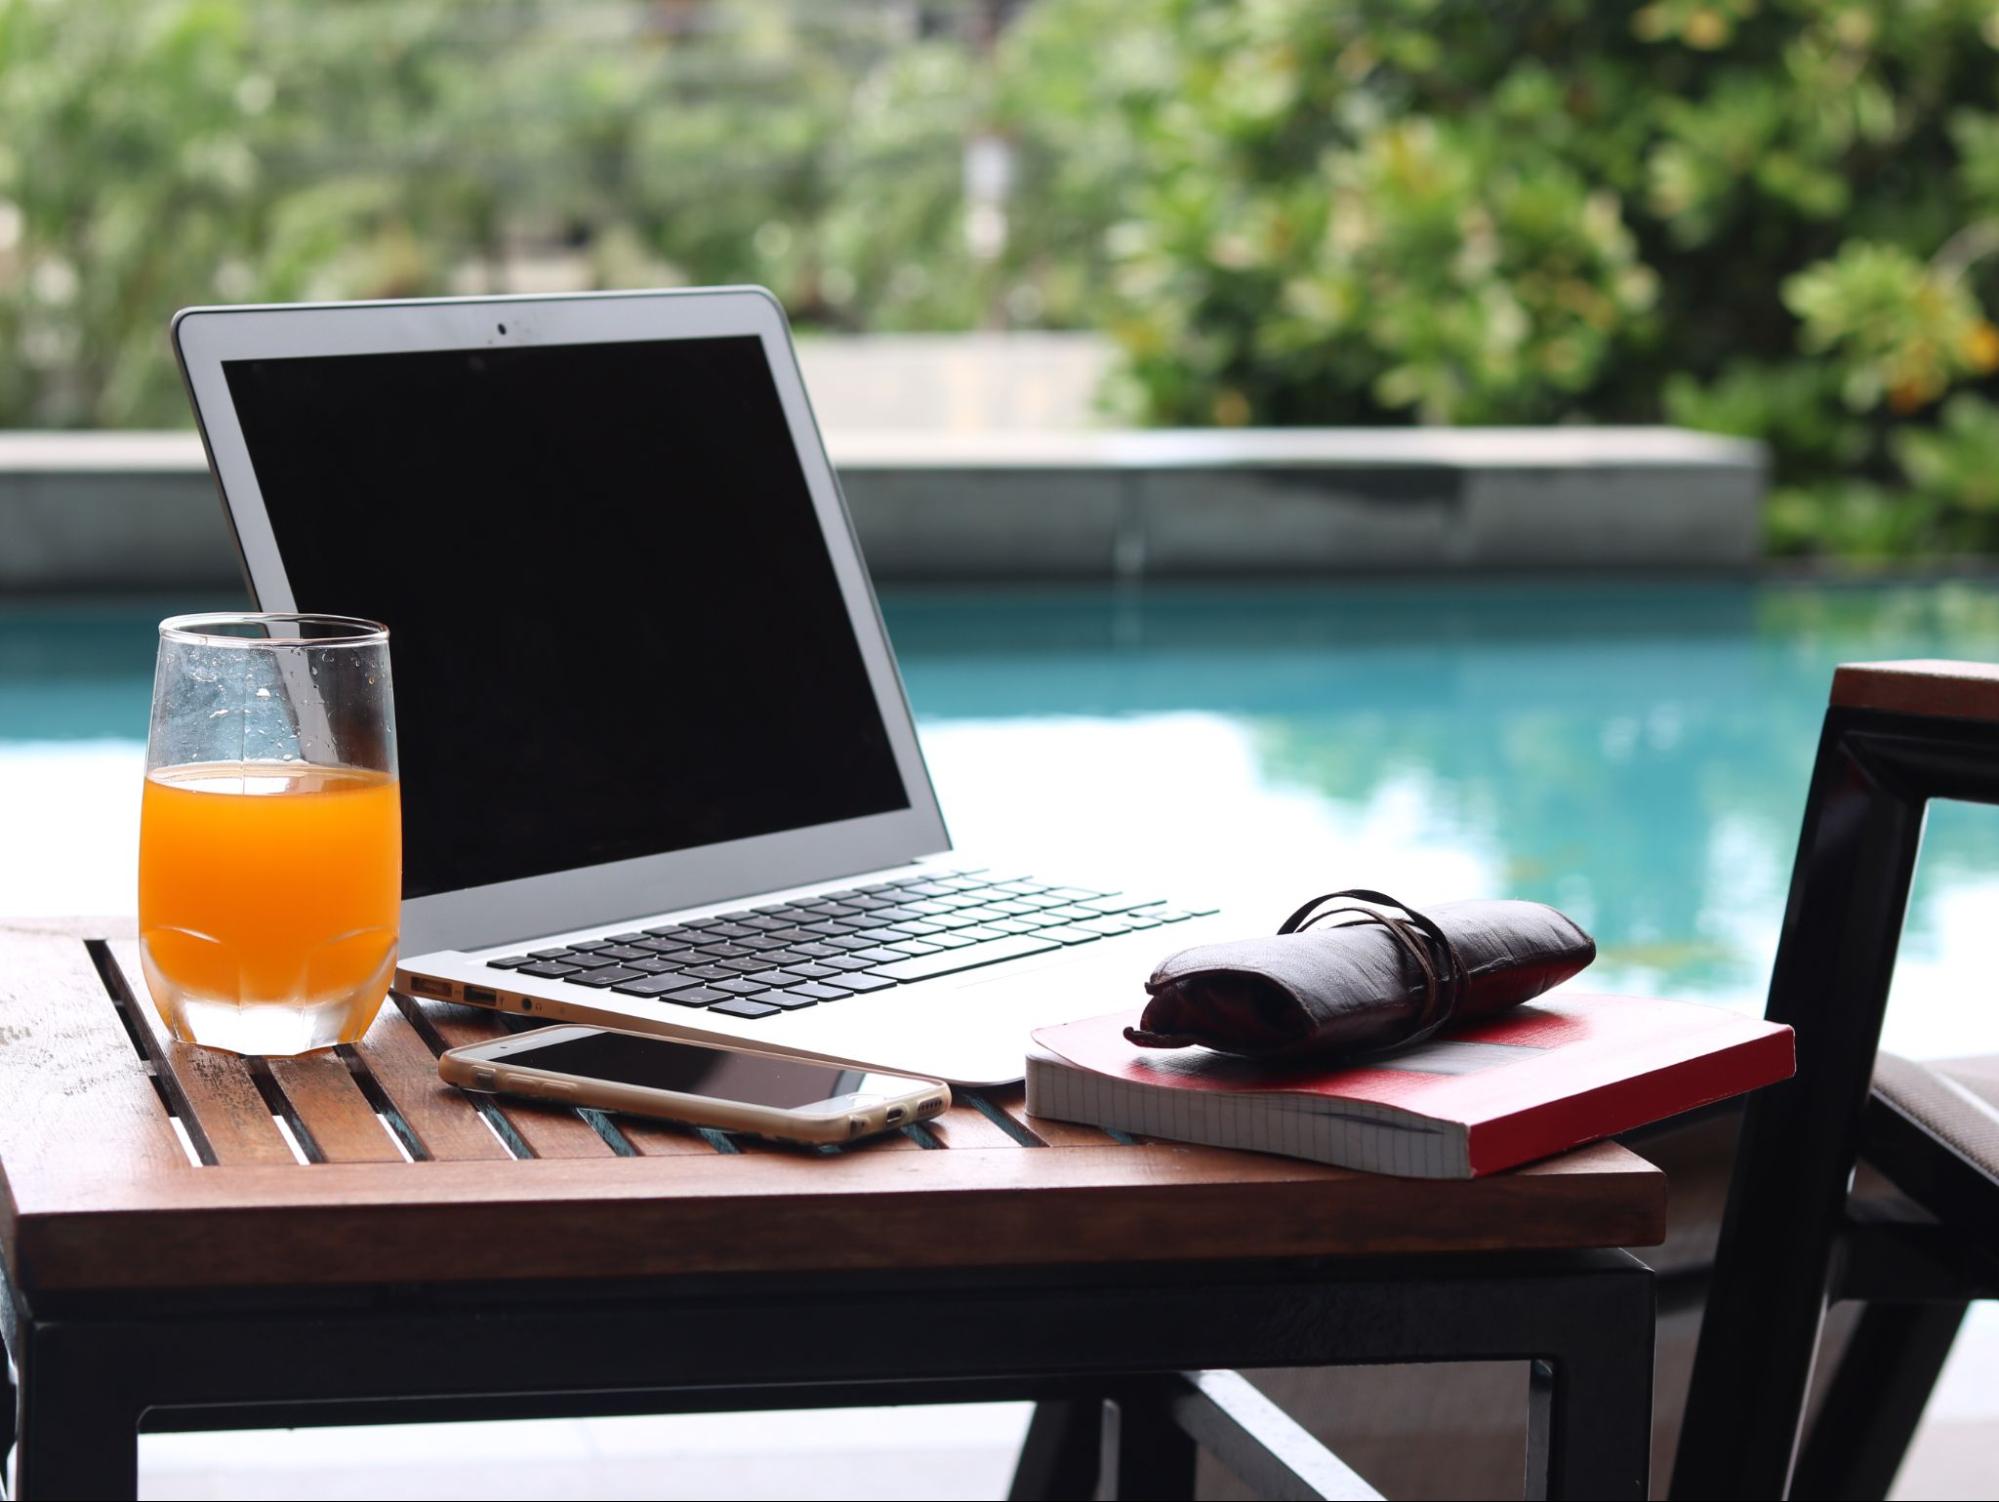 How to Find Jobs Where You Can Work From Anywhere